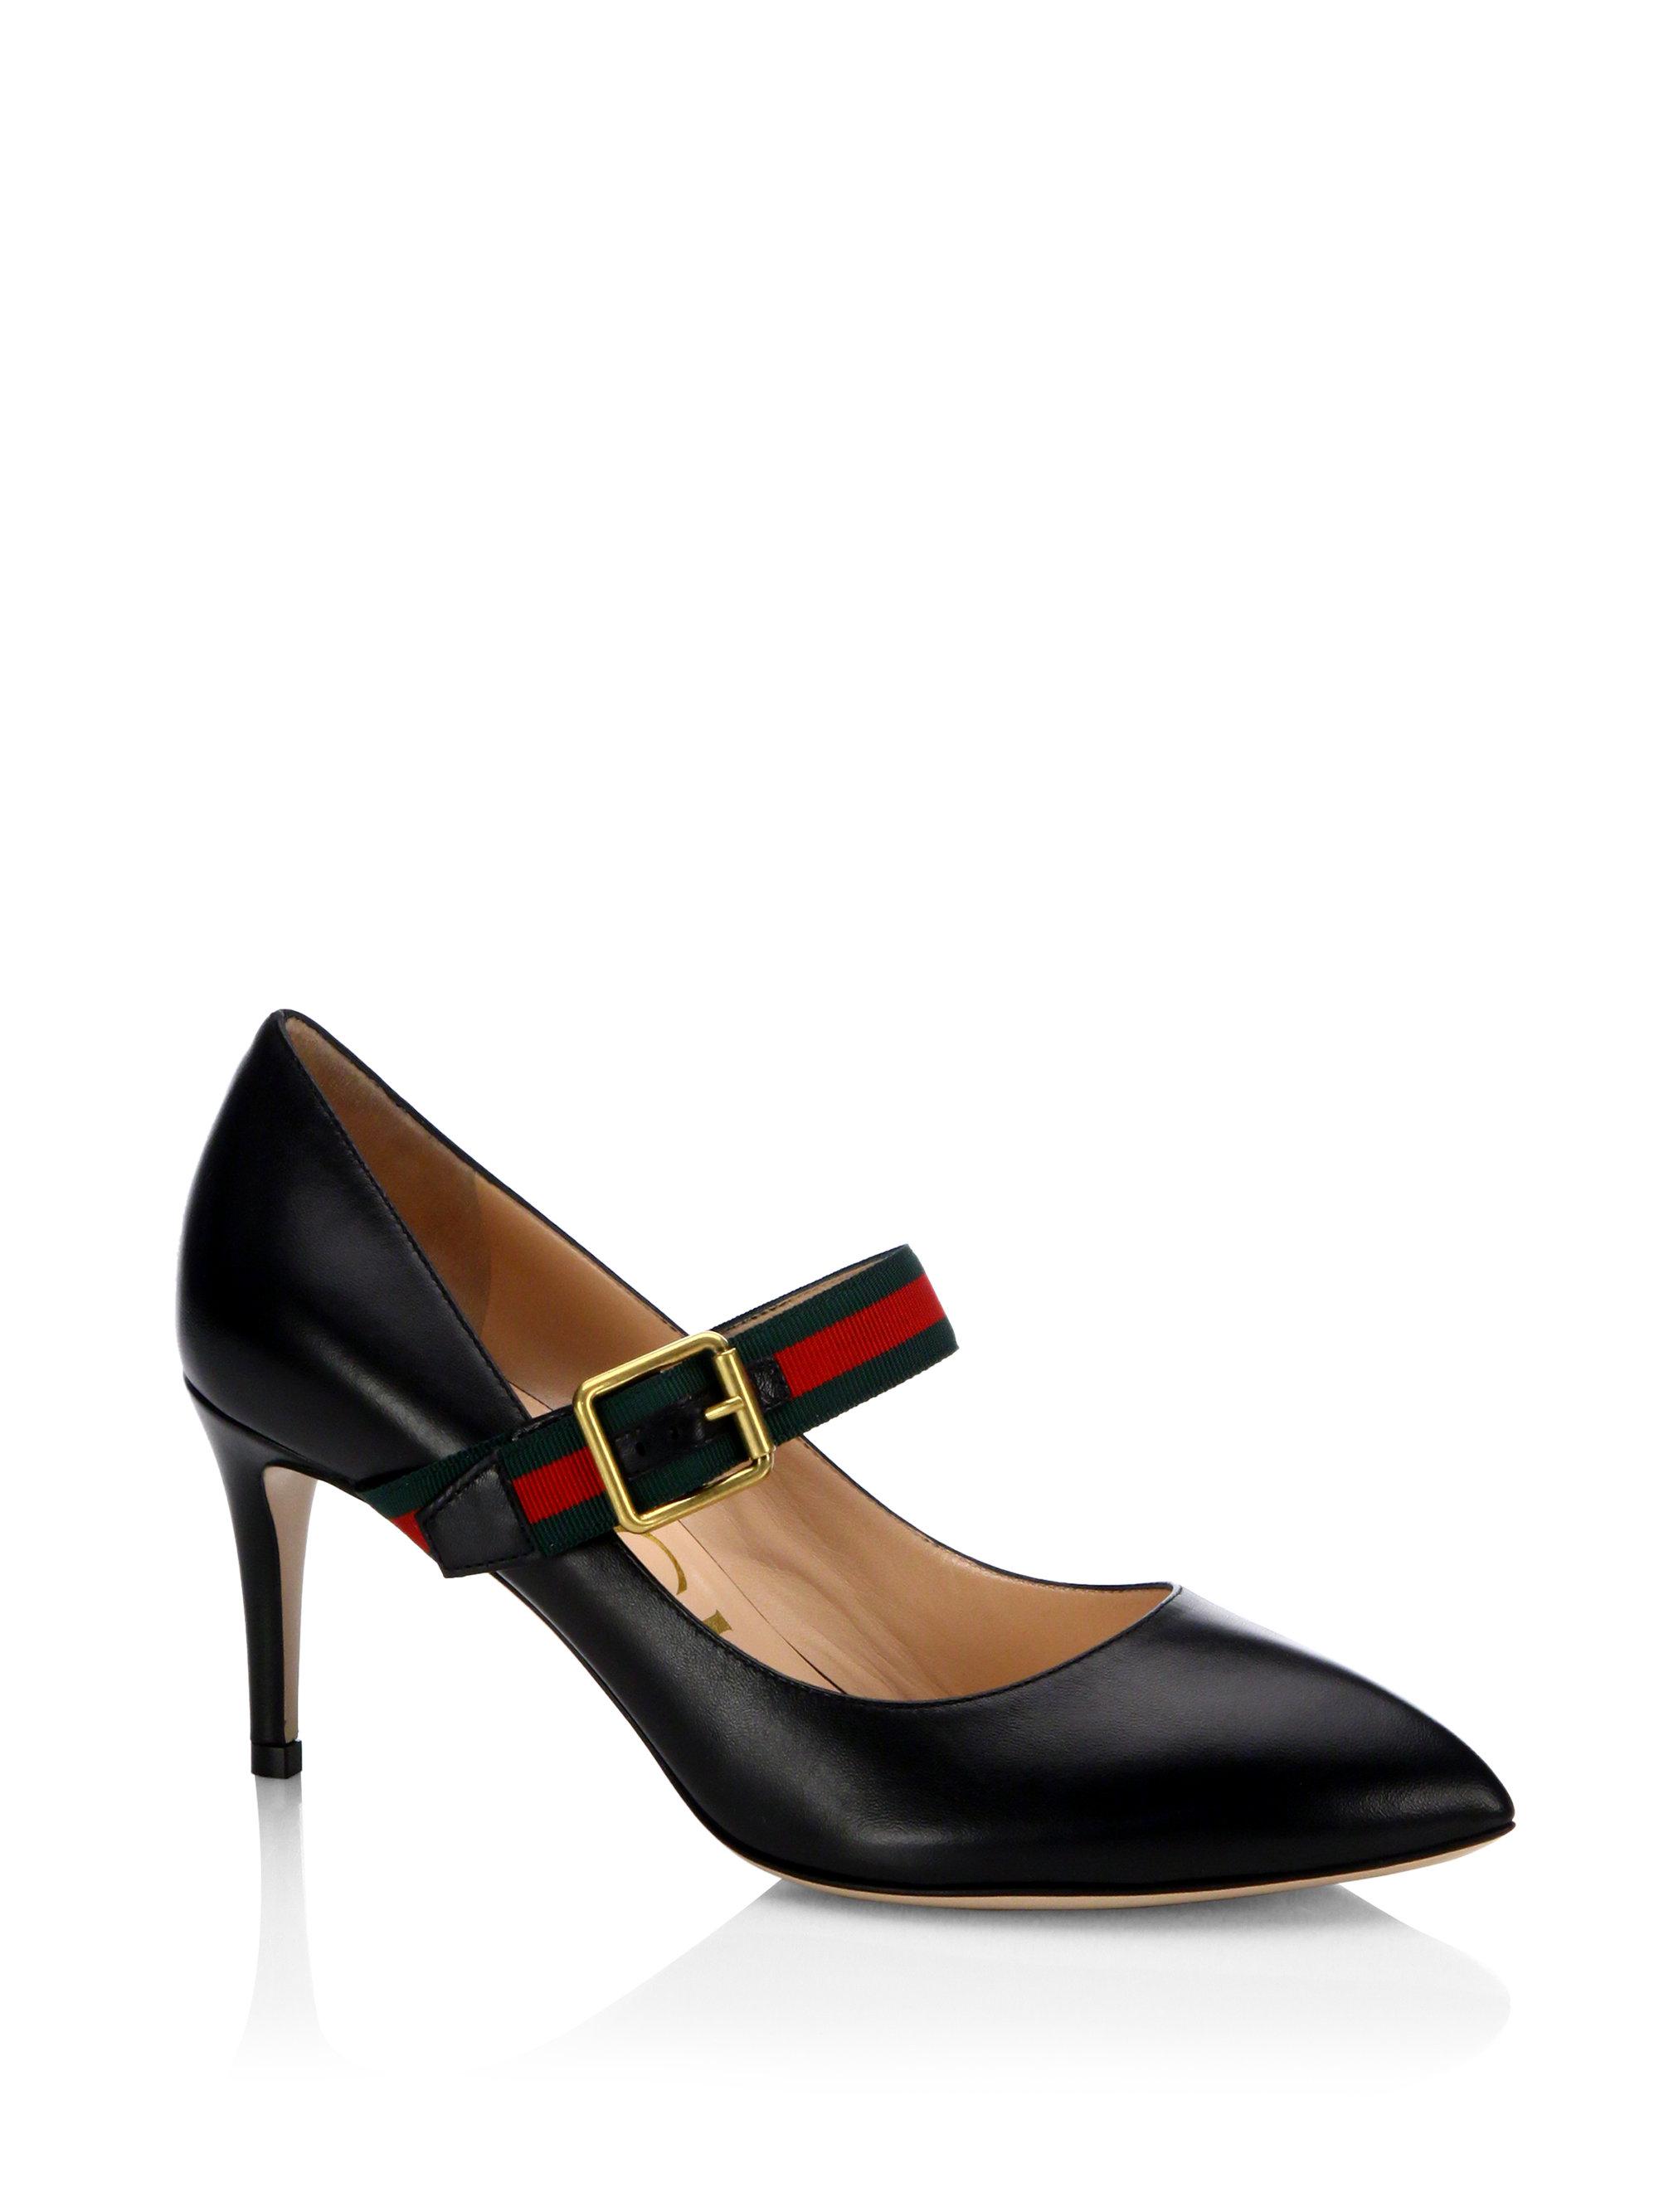 midtergang Mars Hub Gucci Sylvie Leather Mary Jane Pumps in Black - Lyst